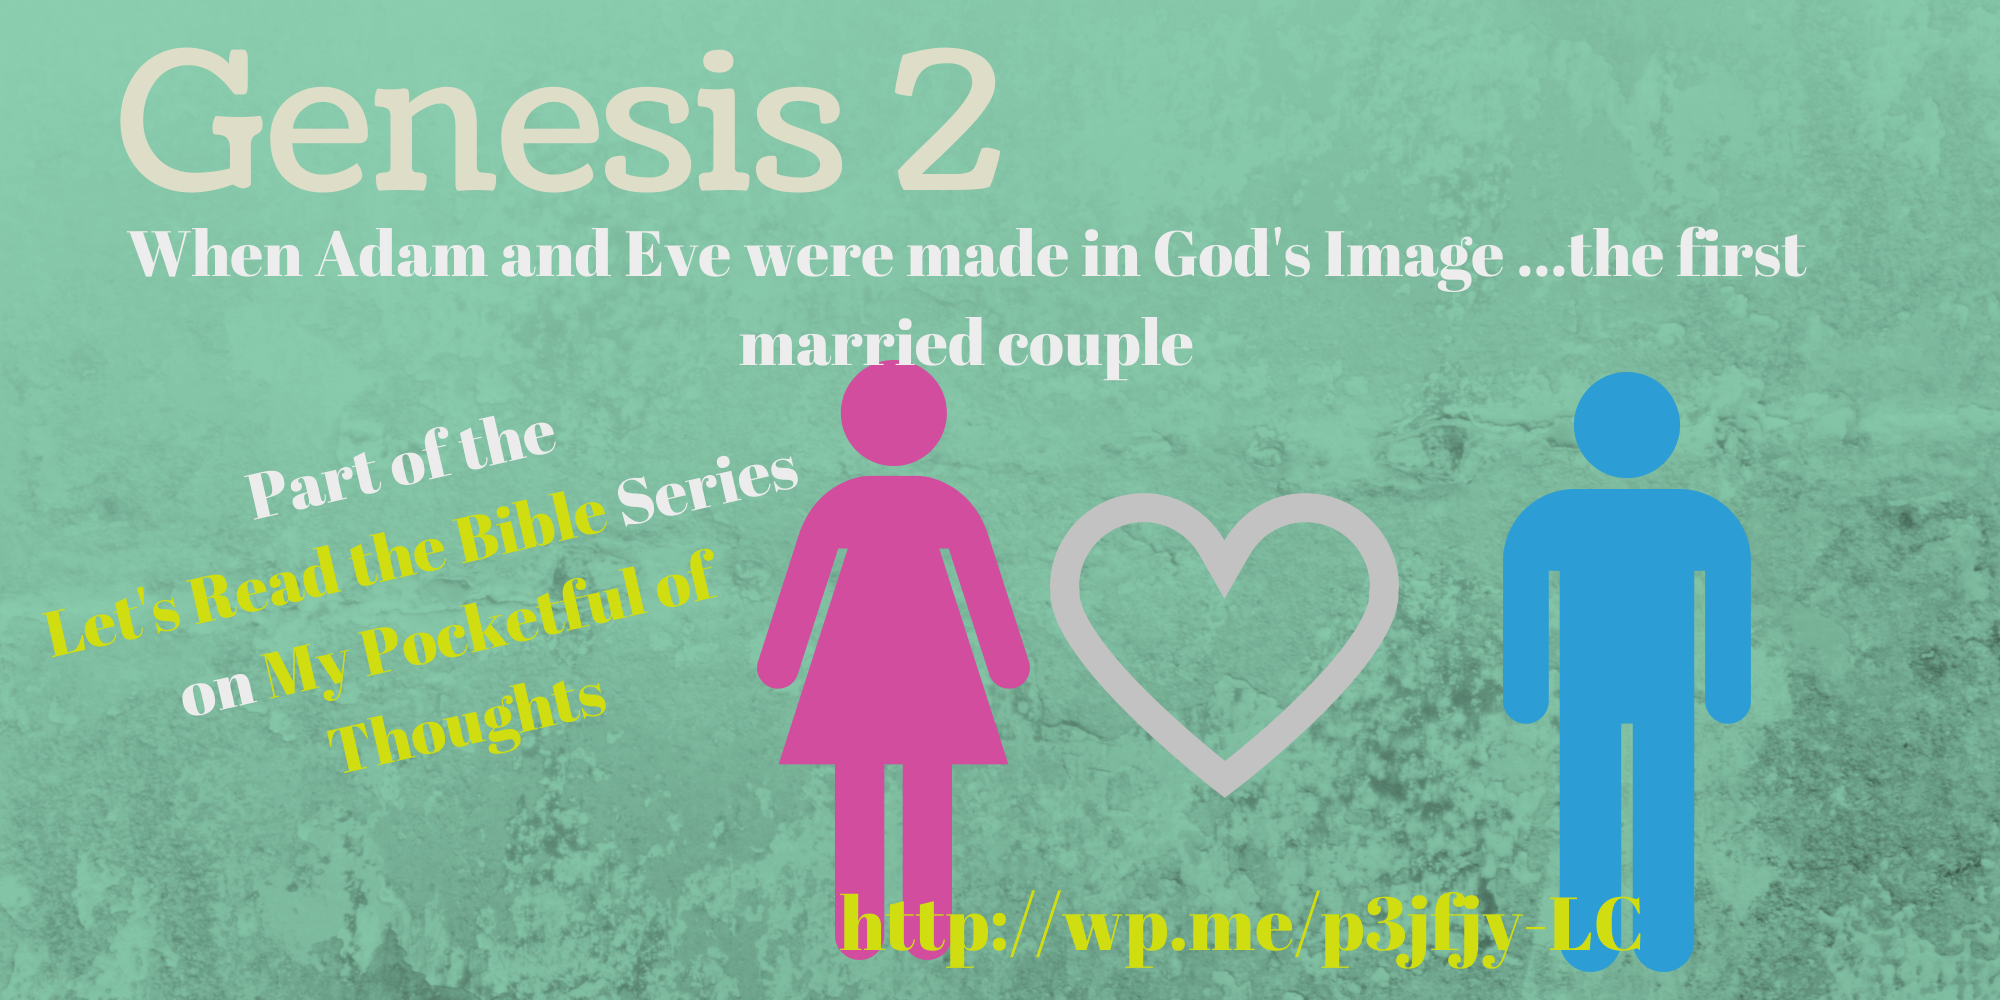 Genesis 2 - The one where Adam and Eve are created & become the first married couple  ... Part of the Let's Read the Bible Series on My Pocketful of Thoughts http://wp.me/p3jfjy-LC #God #Jesus #Bible #Catholic